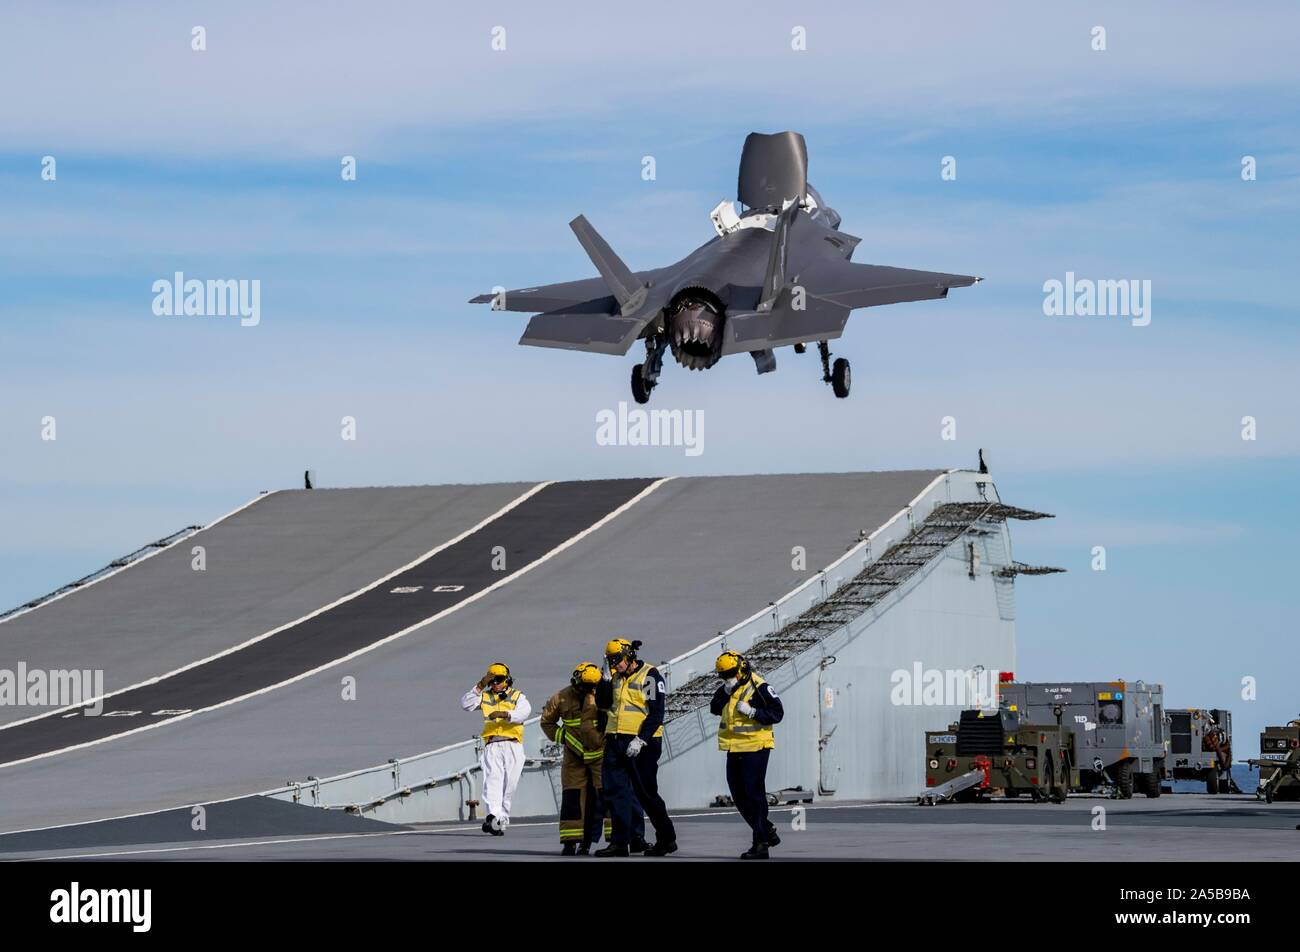 A Royal Air Force F-35B Lightning stealth fighter aircraft launches from the flight deck of the HMS Queen Elizabeth during flight operations October 17, 2019 in the Atlantic Ocean. HMS Queen Elizabeth, is the largest warship ever built by the Royal Navy and is currently deployed in support of exercise WESTLANT 19. Stock Photo